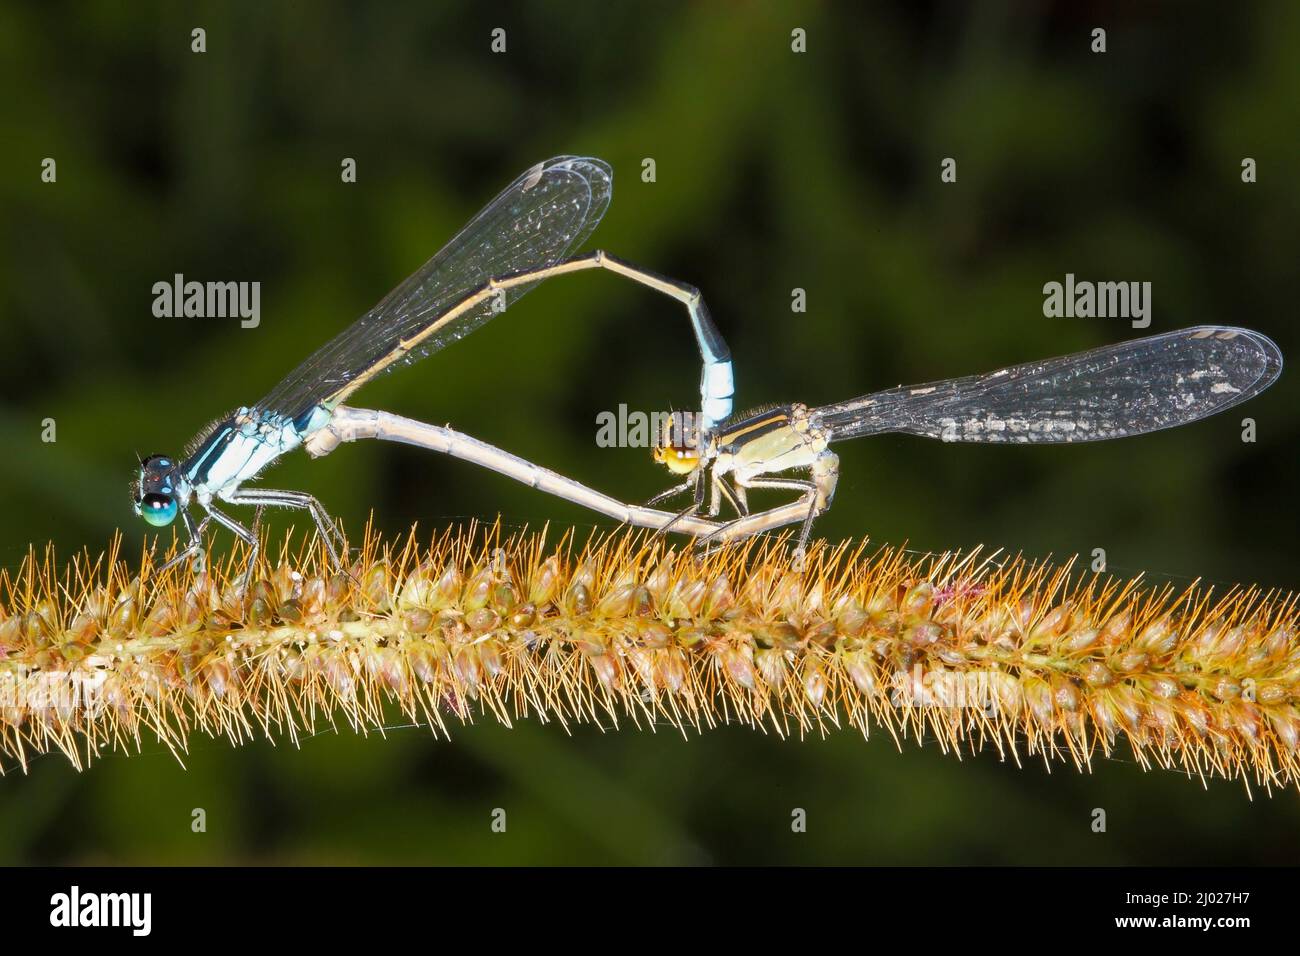 Common Bluetail Damselfly, Ischnura heterosticta. Mating pair in wheel position, male above, female below on a grass seed head. Coffs Harbour, NSW, Au Stock Photo